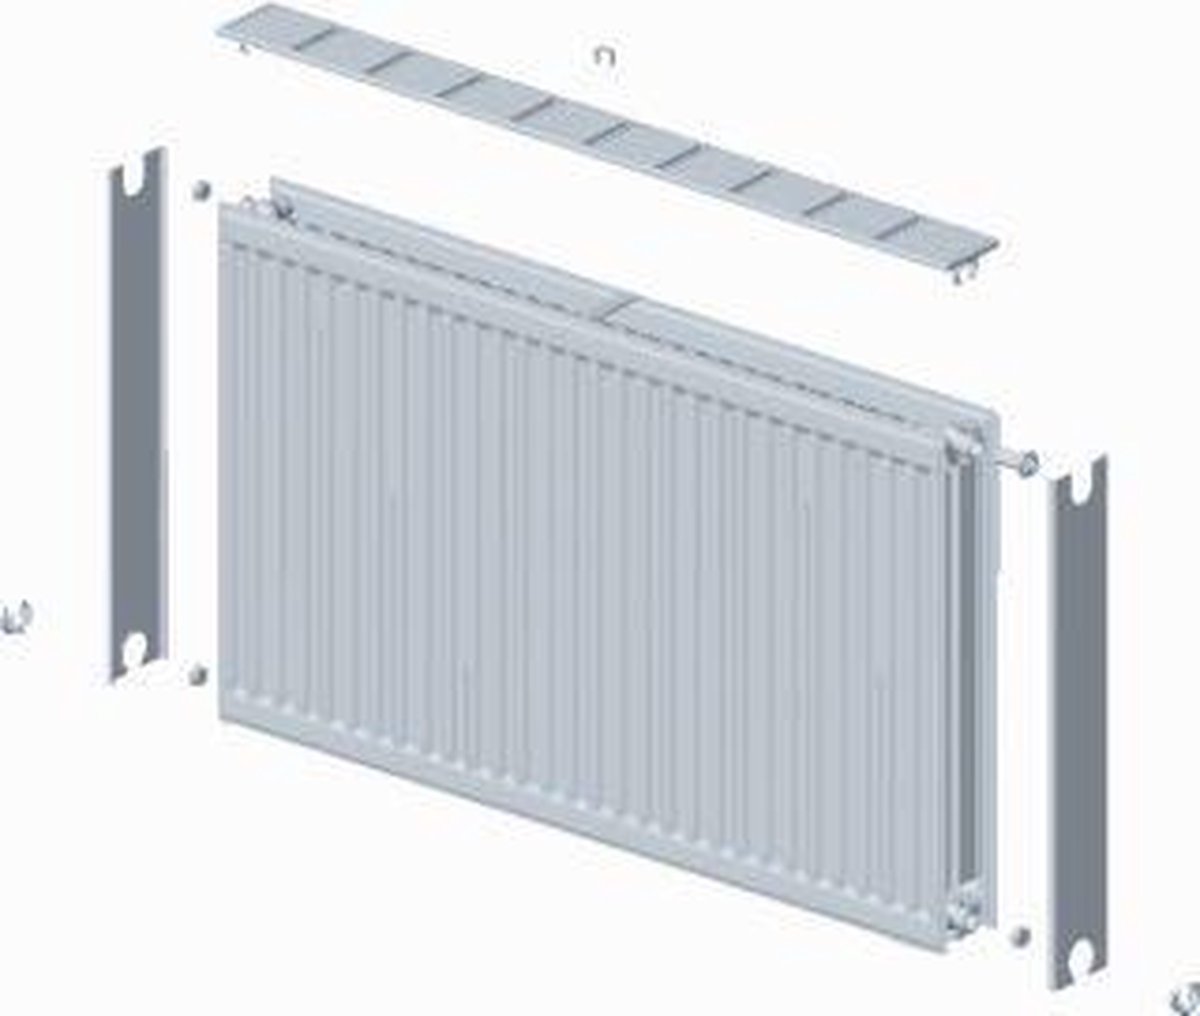 Stelrad paneelradiator Novello, staal, wit, (hxlxd) 500x2600x100mm, 22